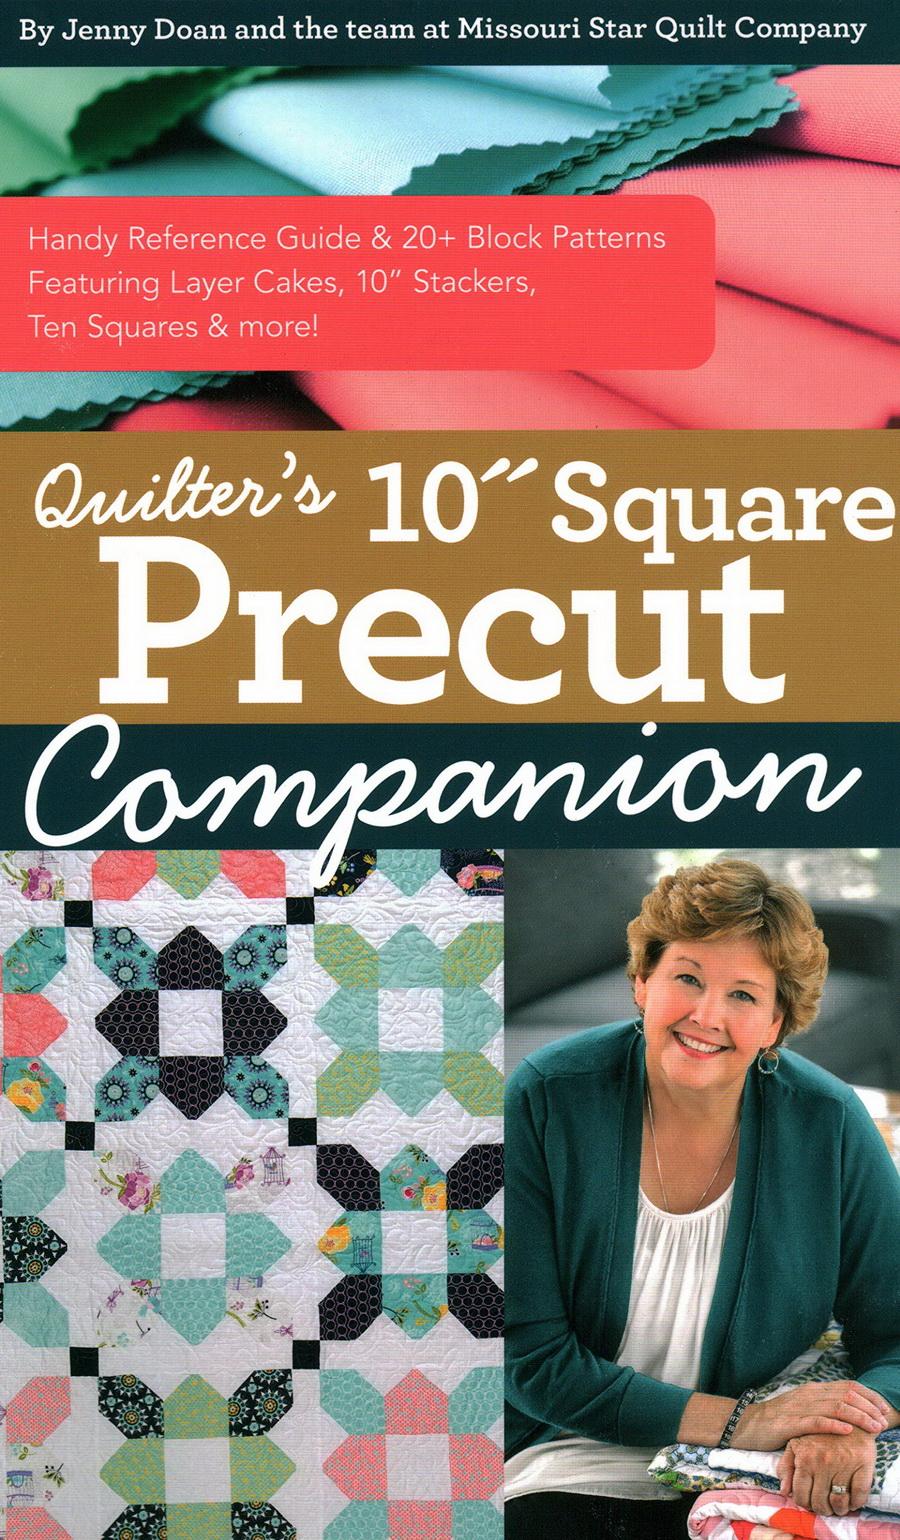 Quilters 10inch Square Precut Companion: Handy Reference Guide & 20+ Block Patterns, Featuring Layer Cakes, 10inch Stackers, Ten Squares and more!